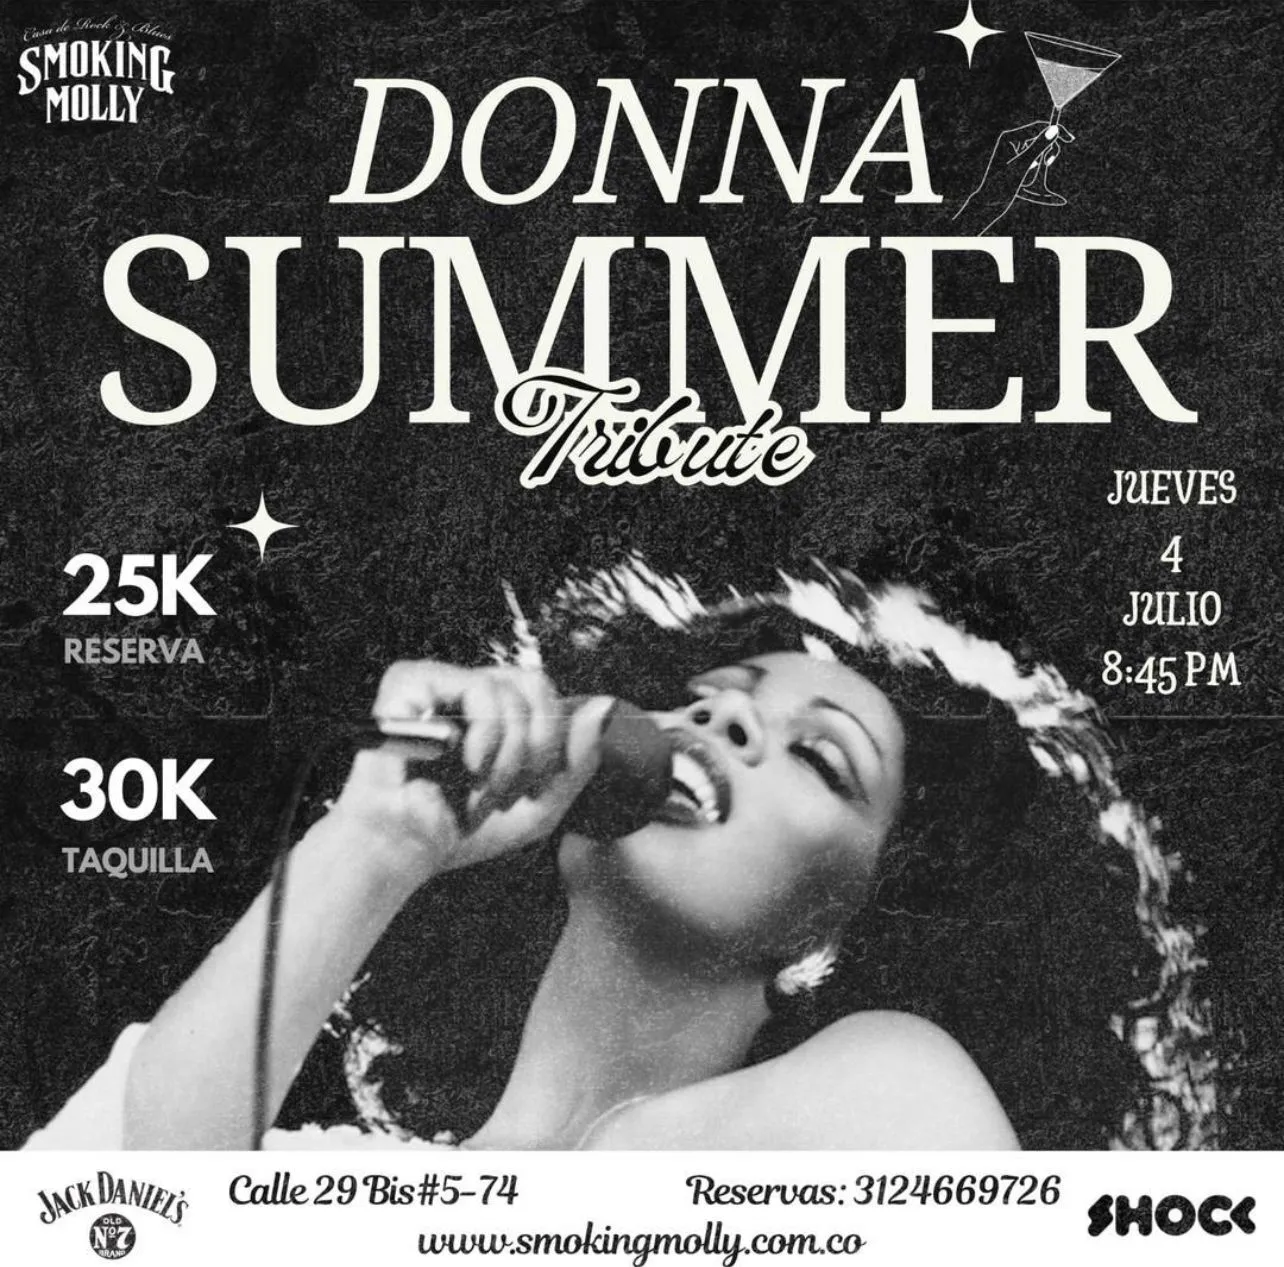 Donna Summer Tribute Smoking Molly